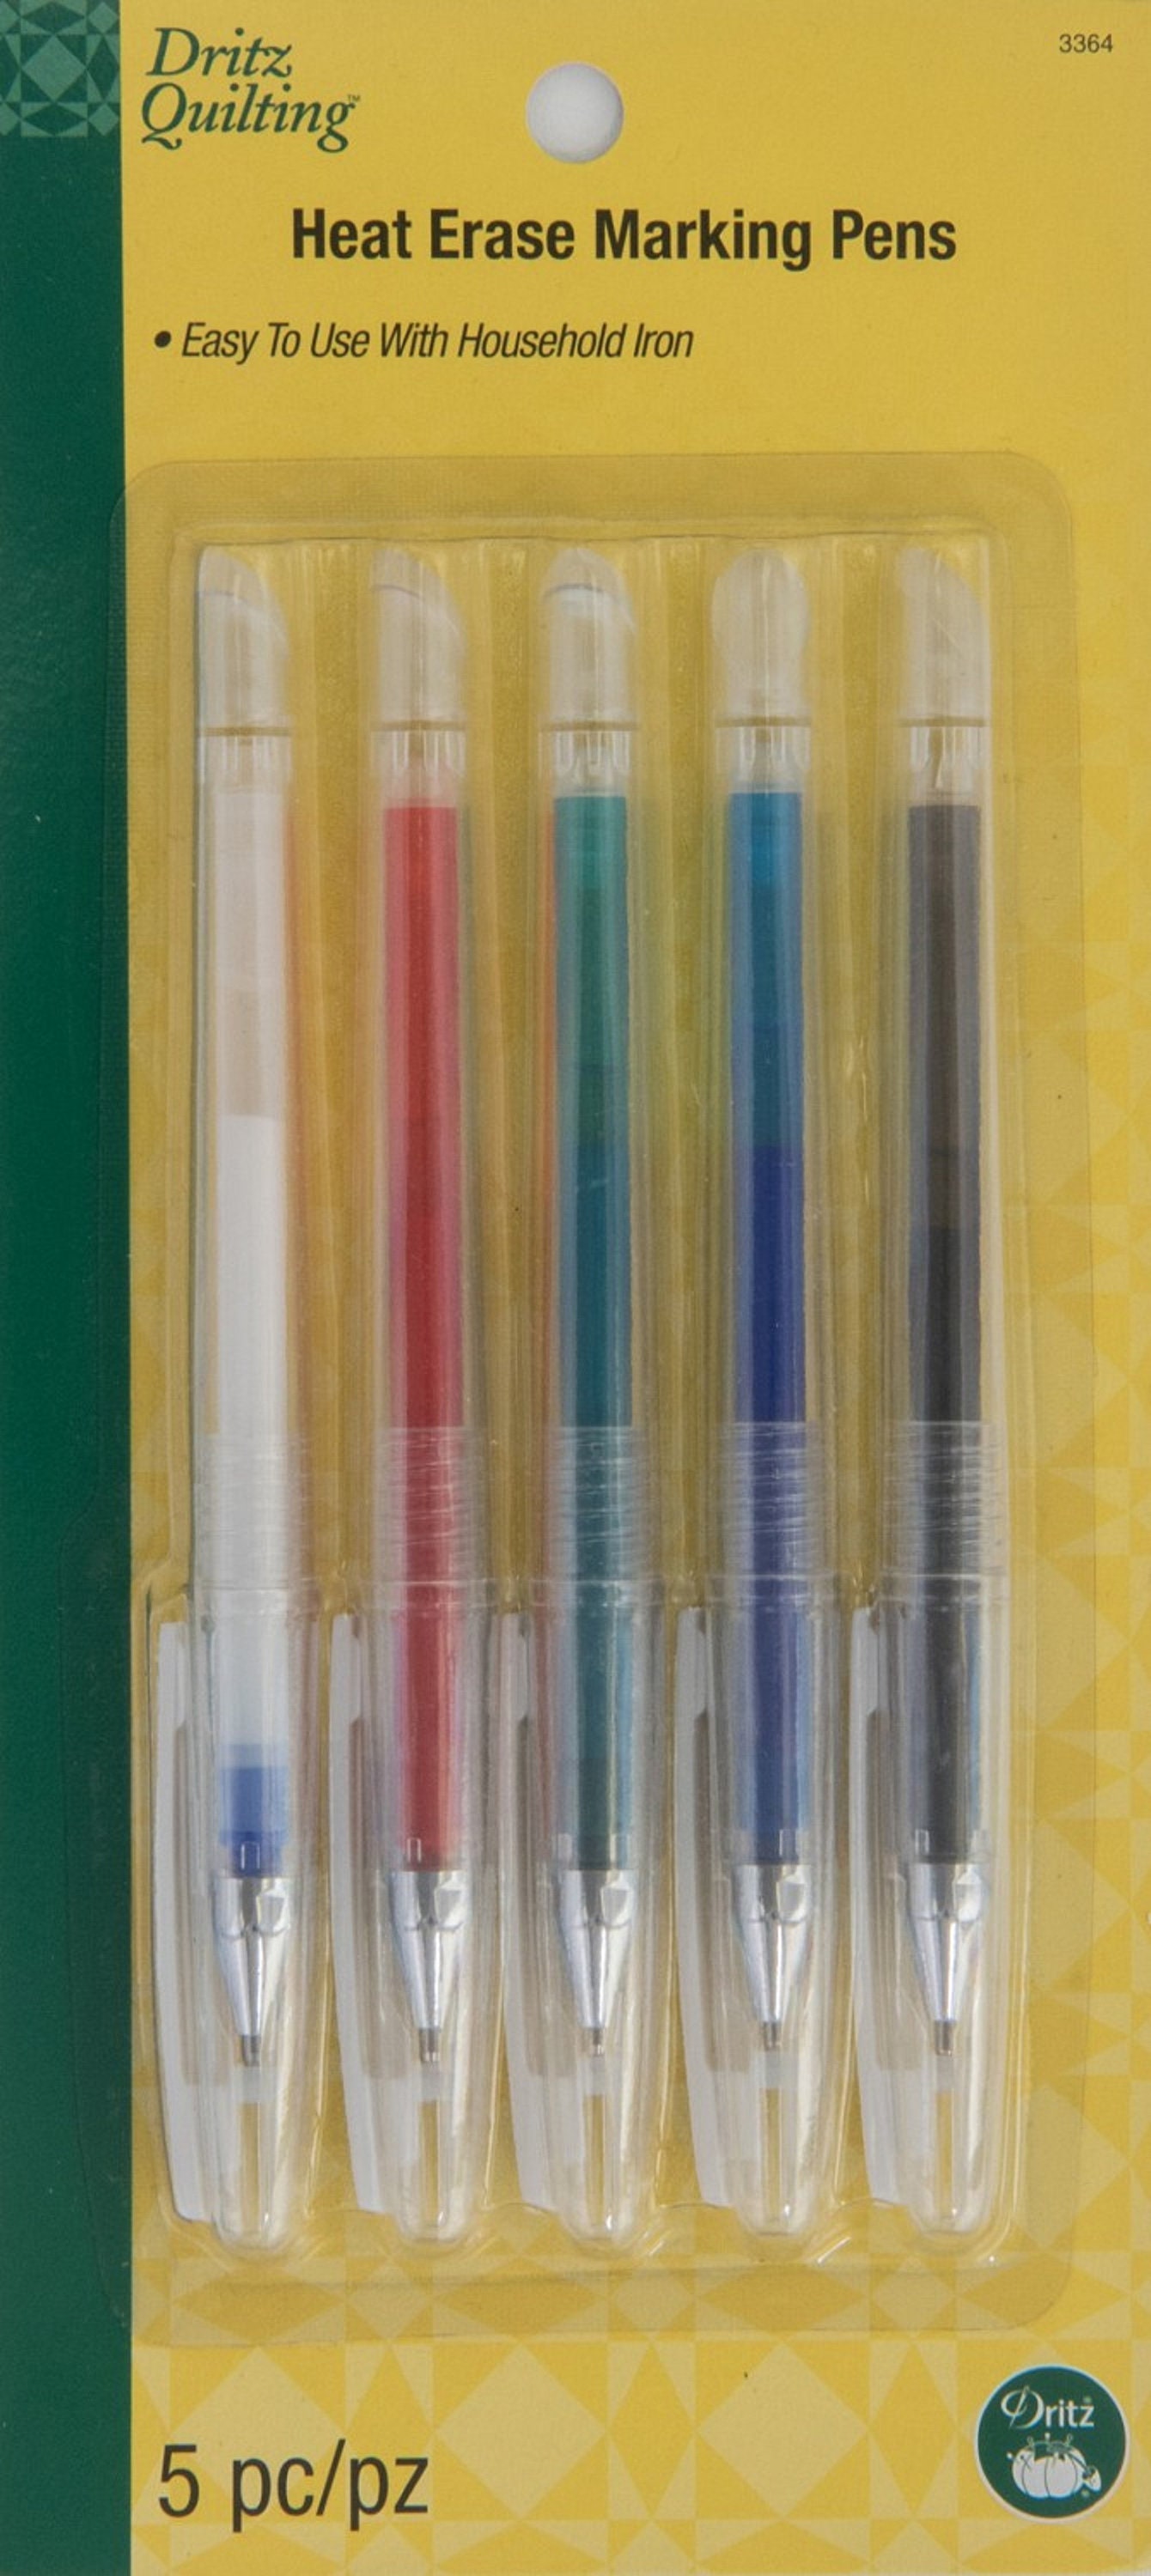 Frixion Pens by Pilot -For marking fabrics - erasable with heat from the  iron - Set of 3 pens, red black blue - bag making, quilting, sewing